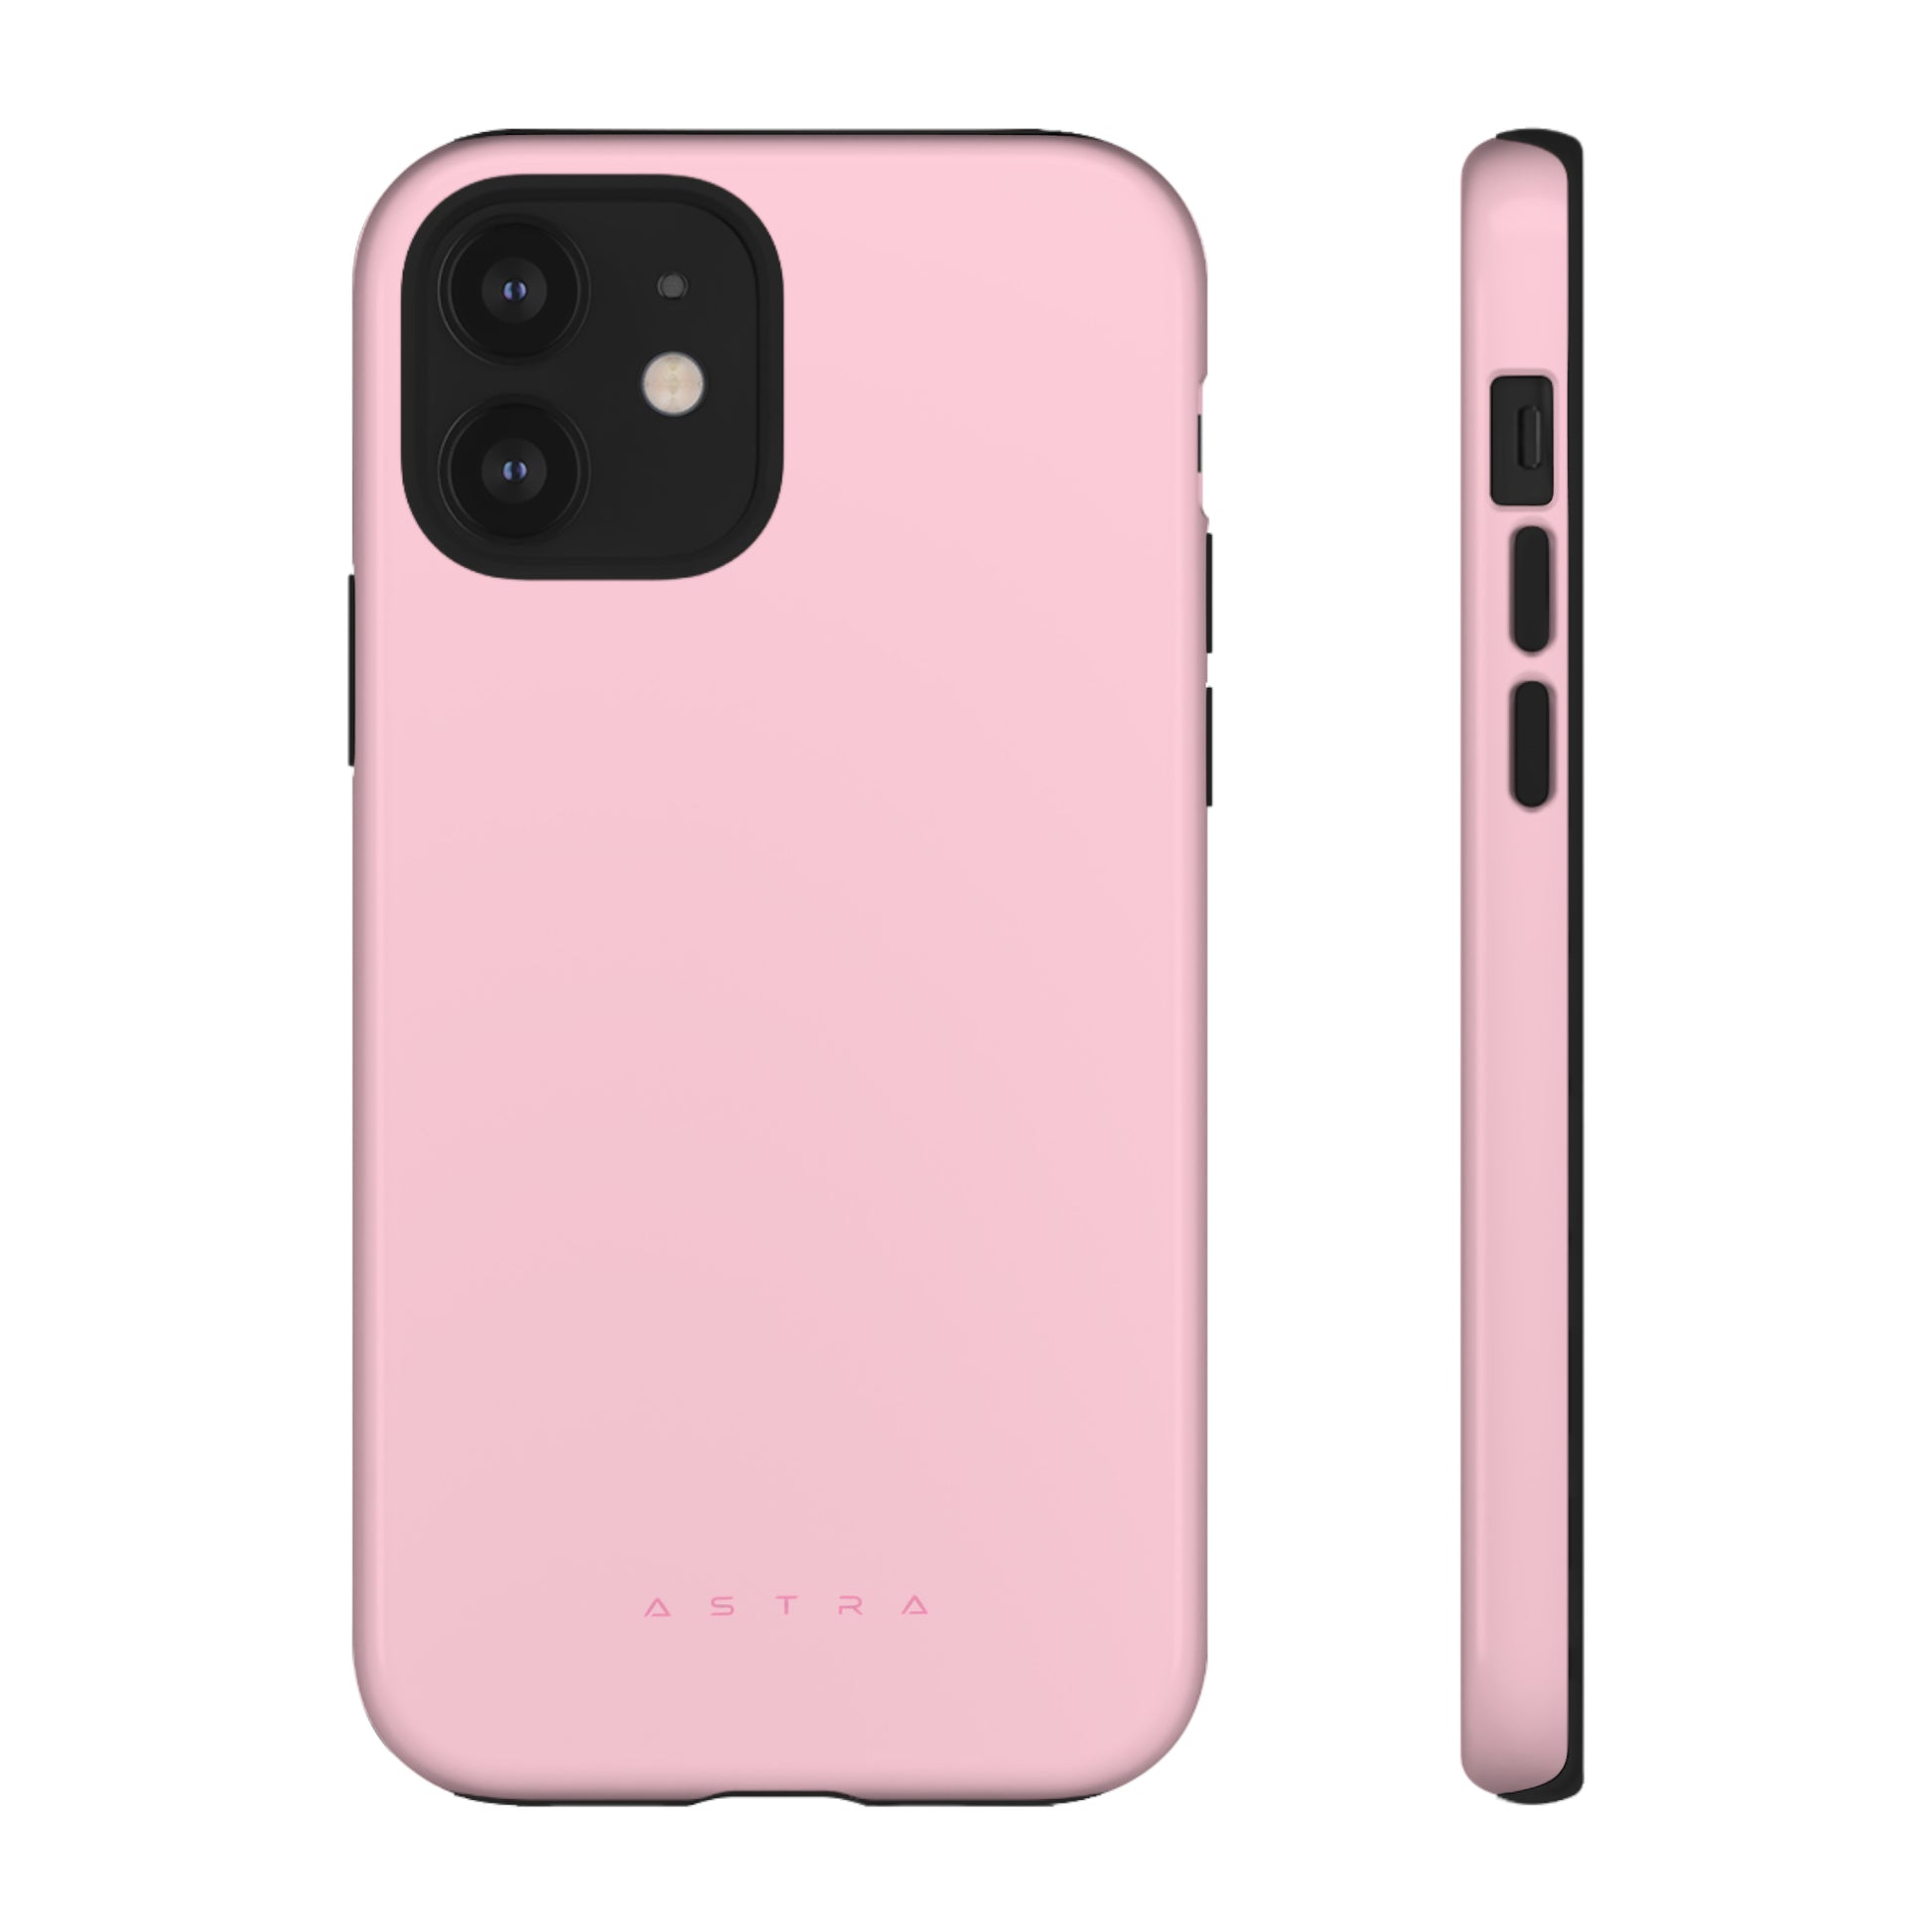 The Original iPhone 12 Glossy Phone Case Accessories Elite Glossy iPhone Cases Matte mobi Phone accessory Phone Cases Samsung Cases Valentine's Day Picks